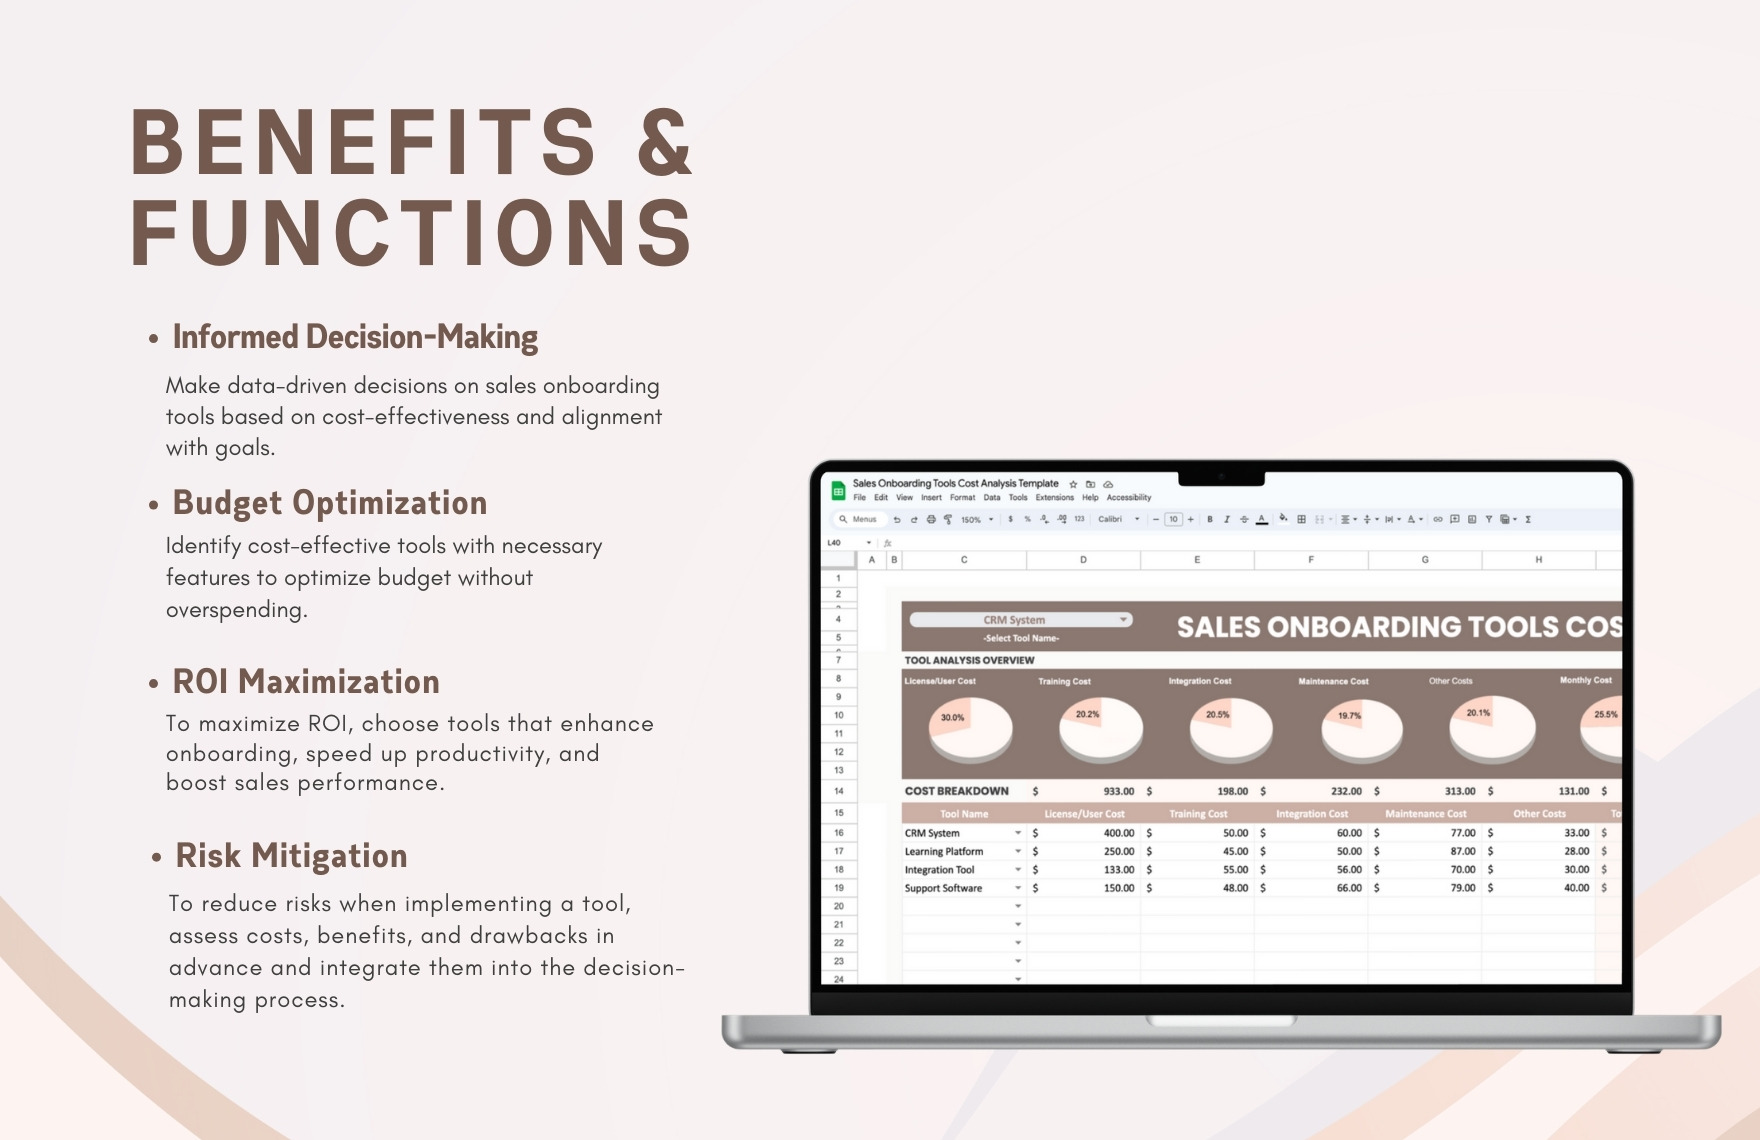 Sales Onboarding Tools Cost Analysis Template